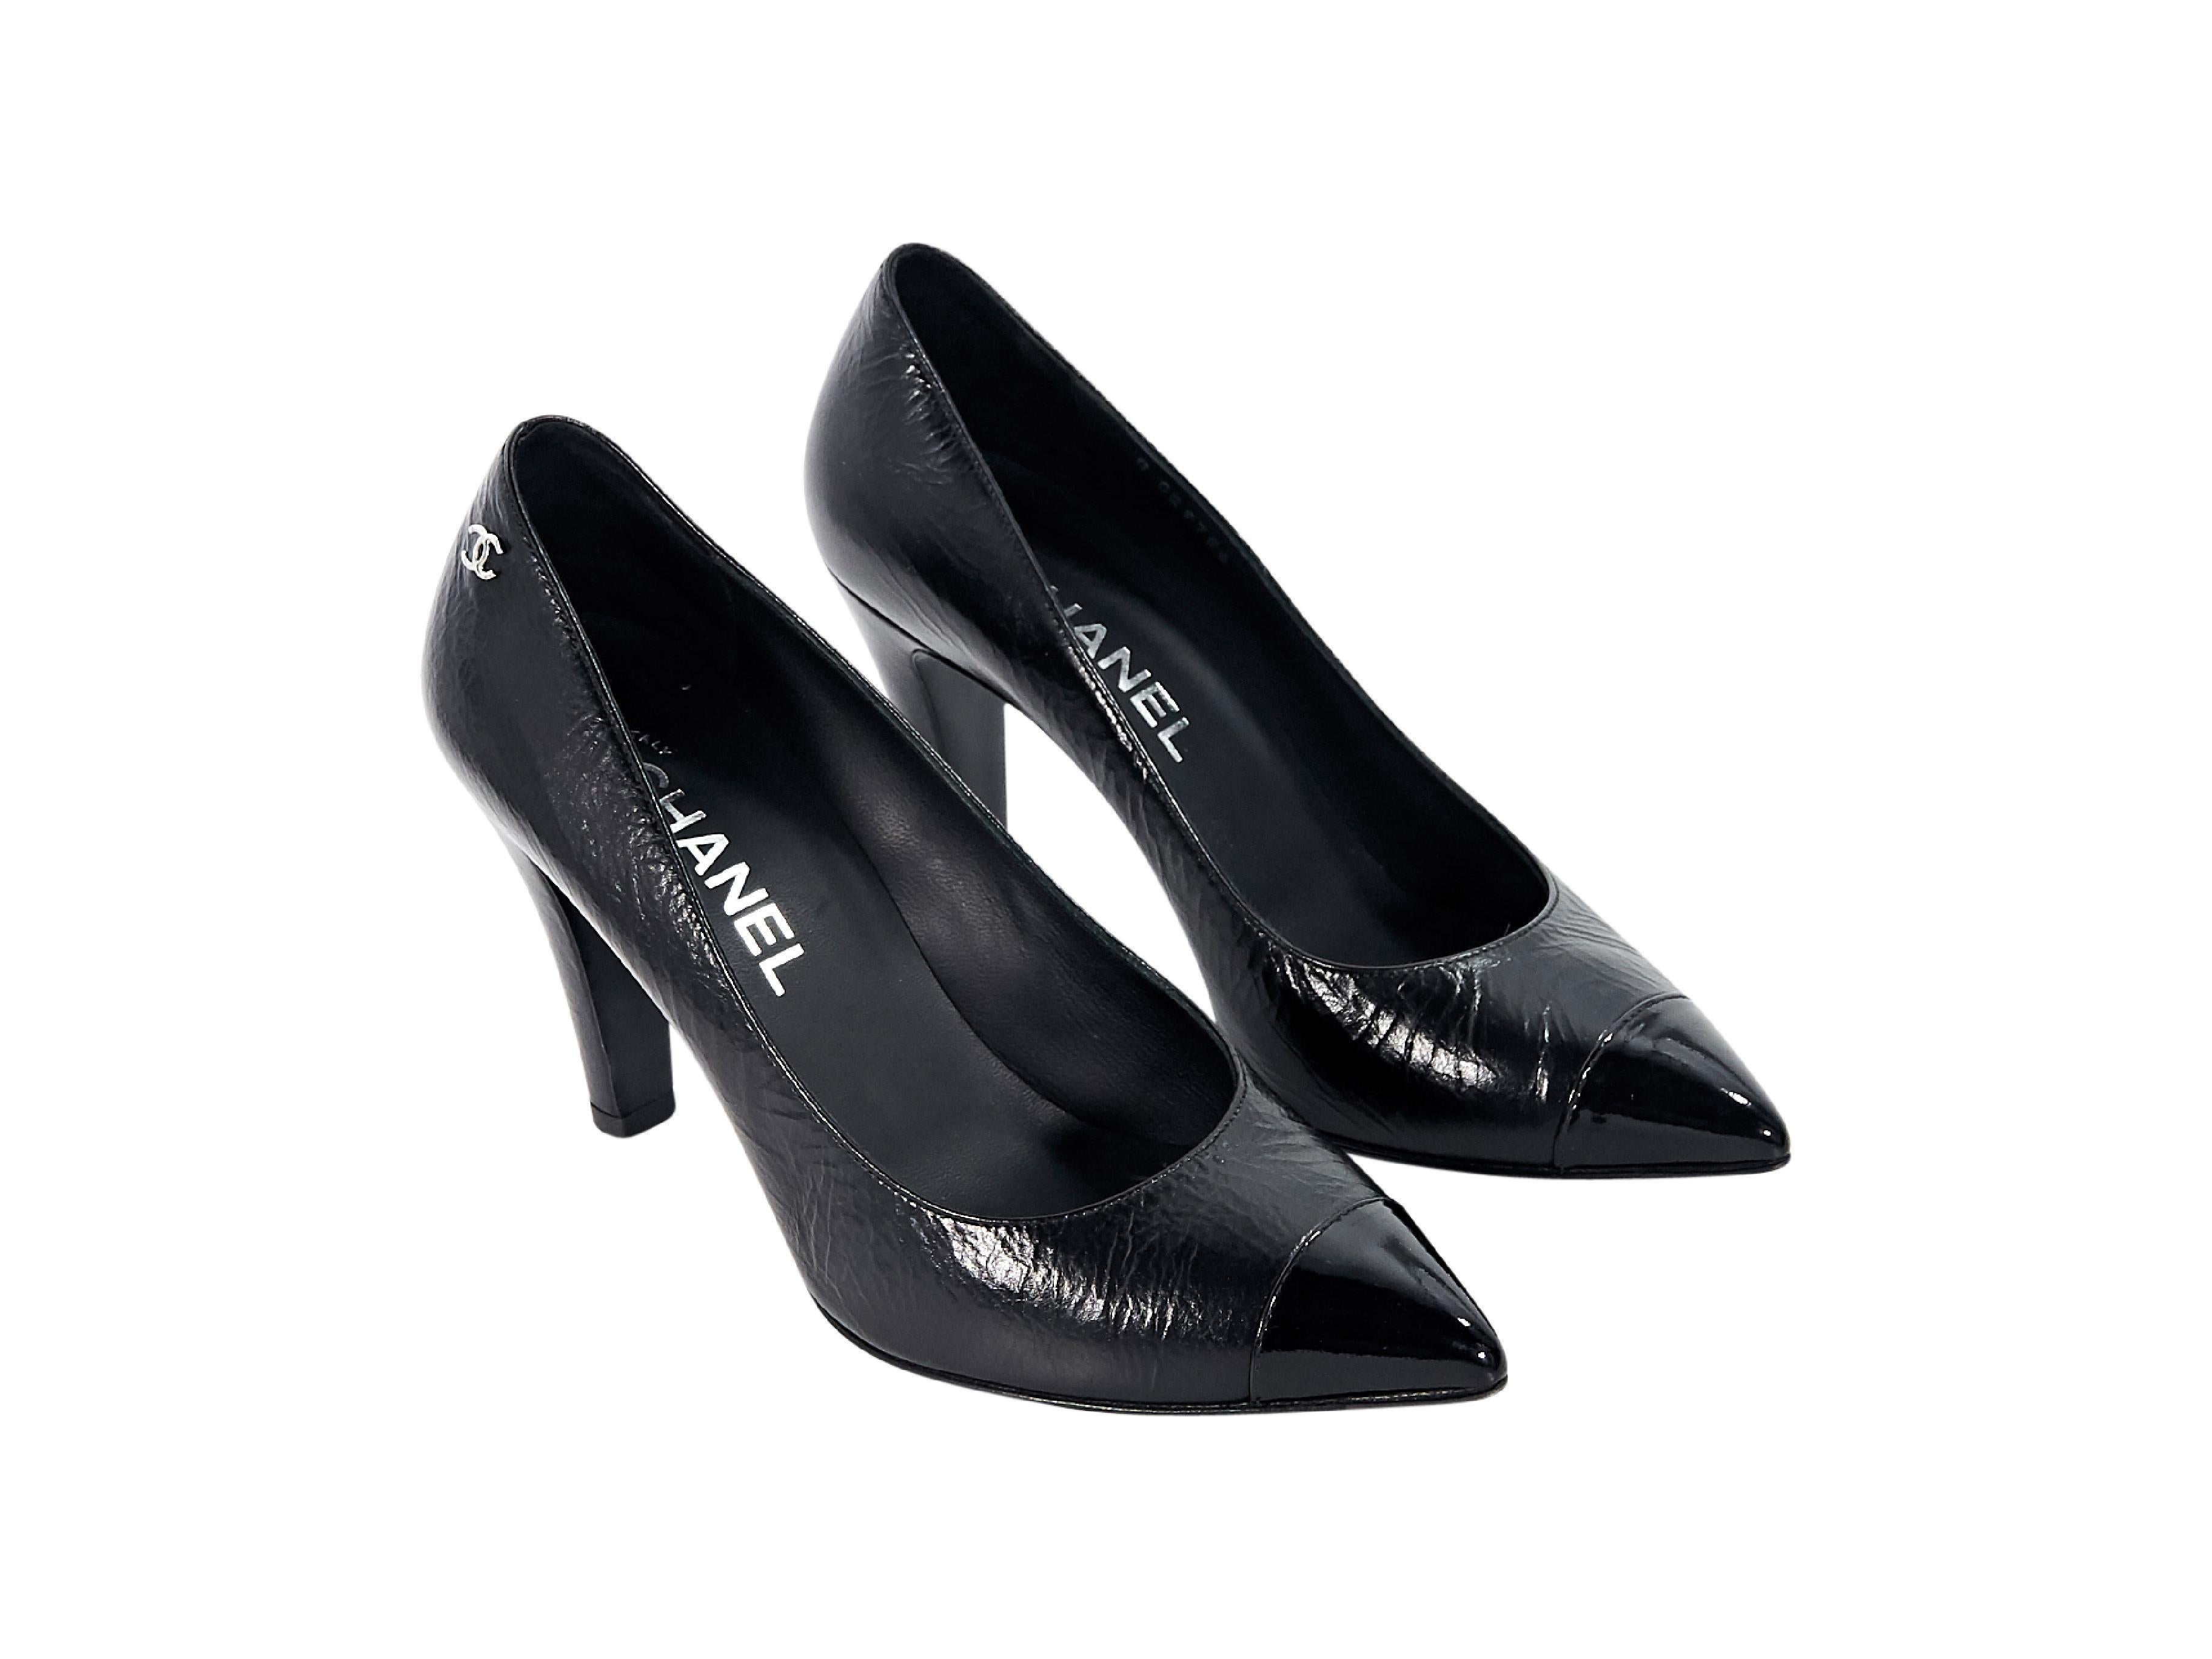 Product details:  Black leather pumps by Chanel.  Point cap toe.  Slip-on style.  3.75